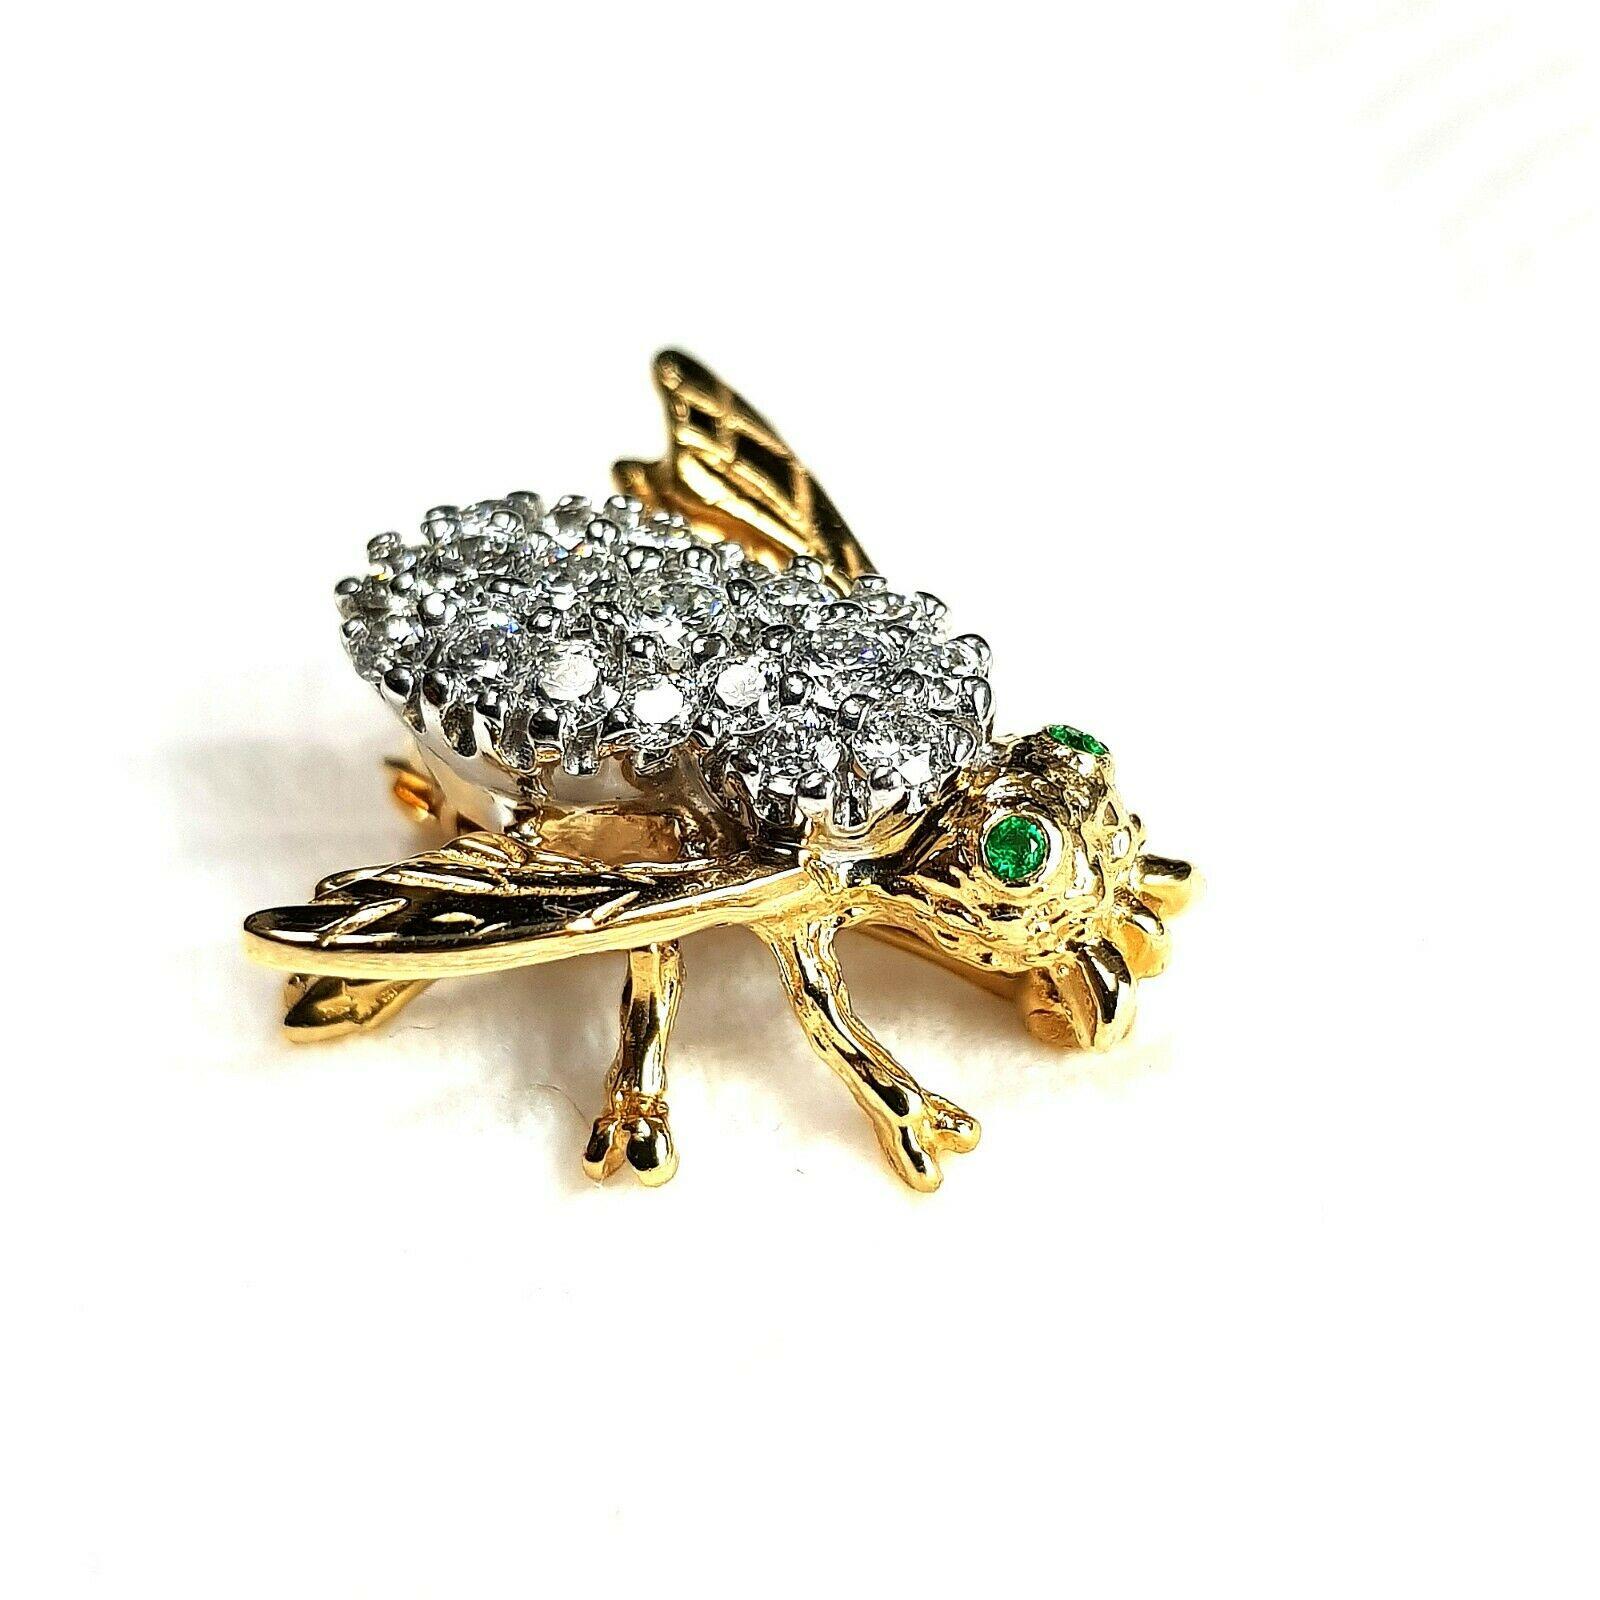  This is a cute bee made in GUCCI style with 2 emeralds in eyes and 20 diamonds G color and SI1 clarity 1.20ct in total weight. Made in 14k two tone gold. Looks very stylish!
Specifications:
    main stone: EMERALD(eyes) 2PCS
    additional: